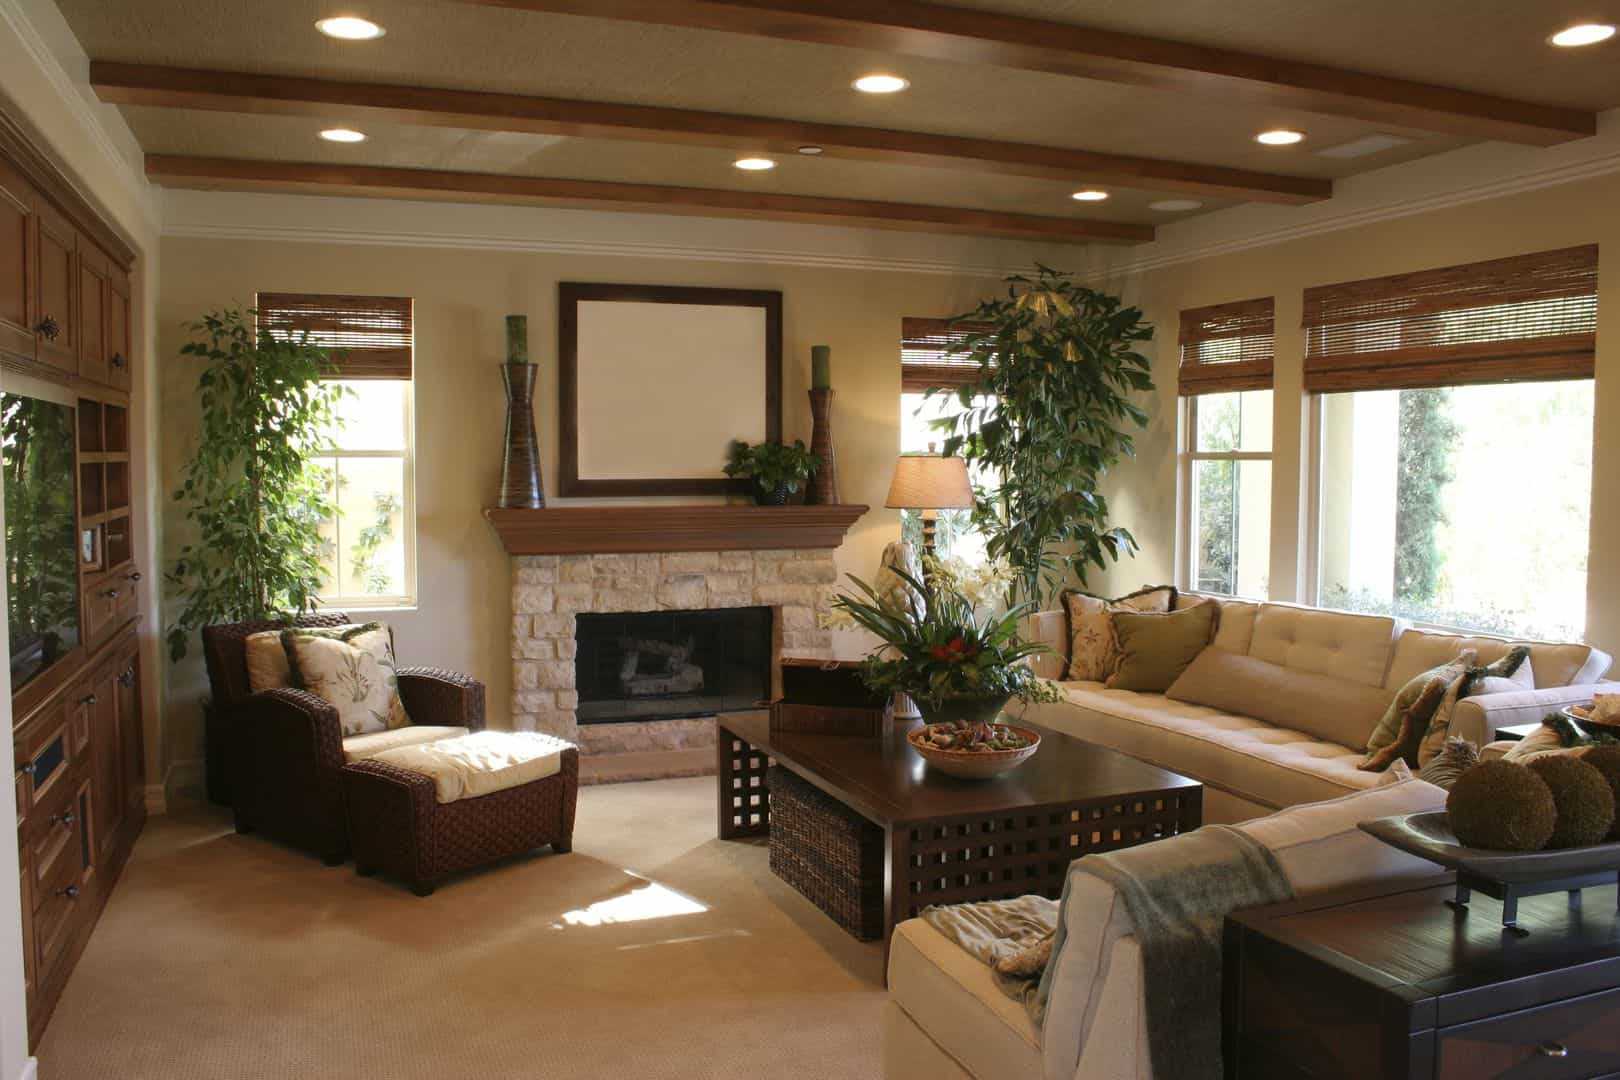 Living Room Recessed Lighting
 Living Room With Tall Houseplants And Recessed Lighting